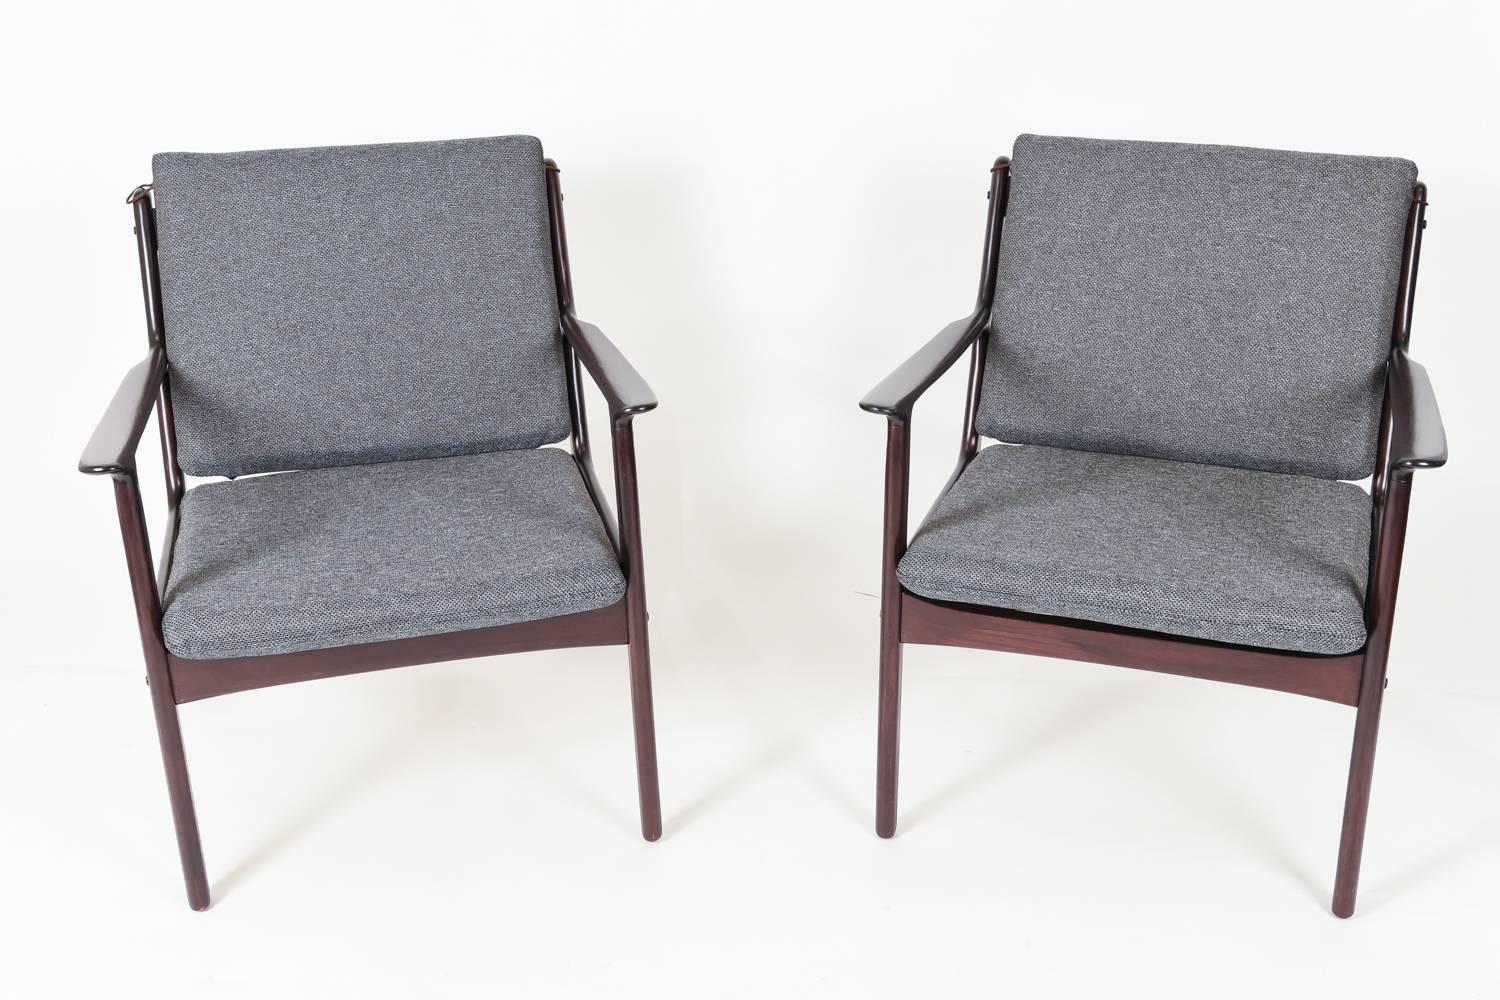 Classic Ole Wanscher design pair of easy chairs model PJ 112 designed in 1951 and produced P. Jeppesen Møbelfabrik.